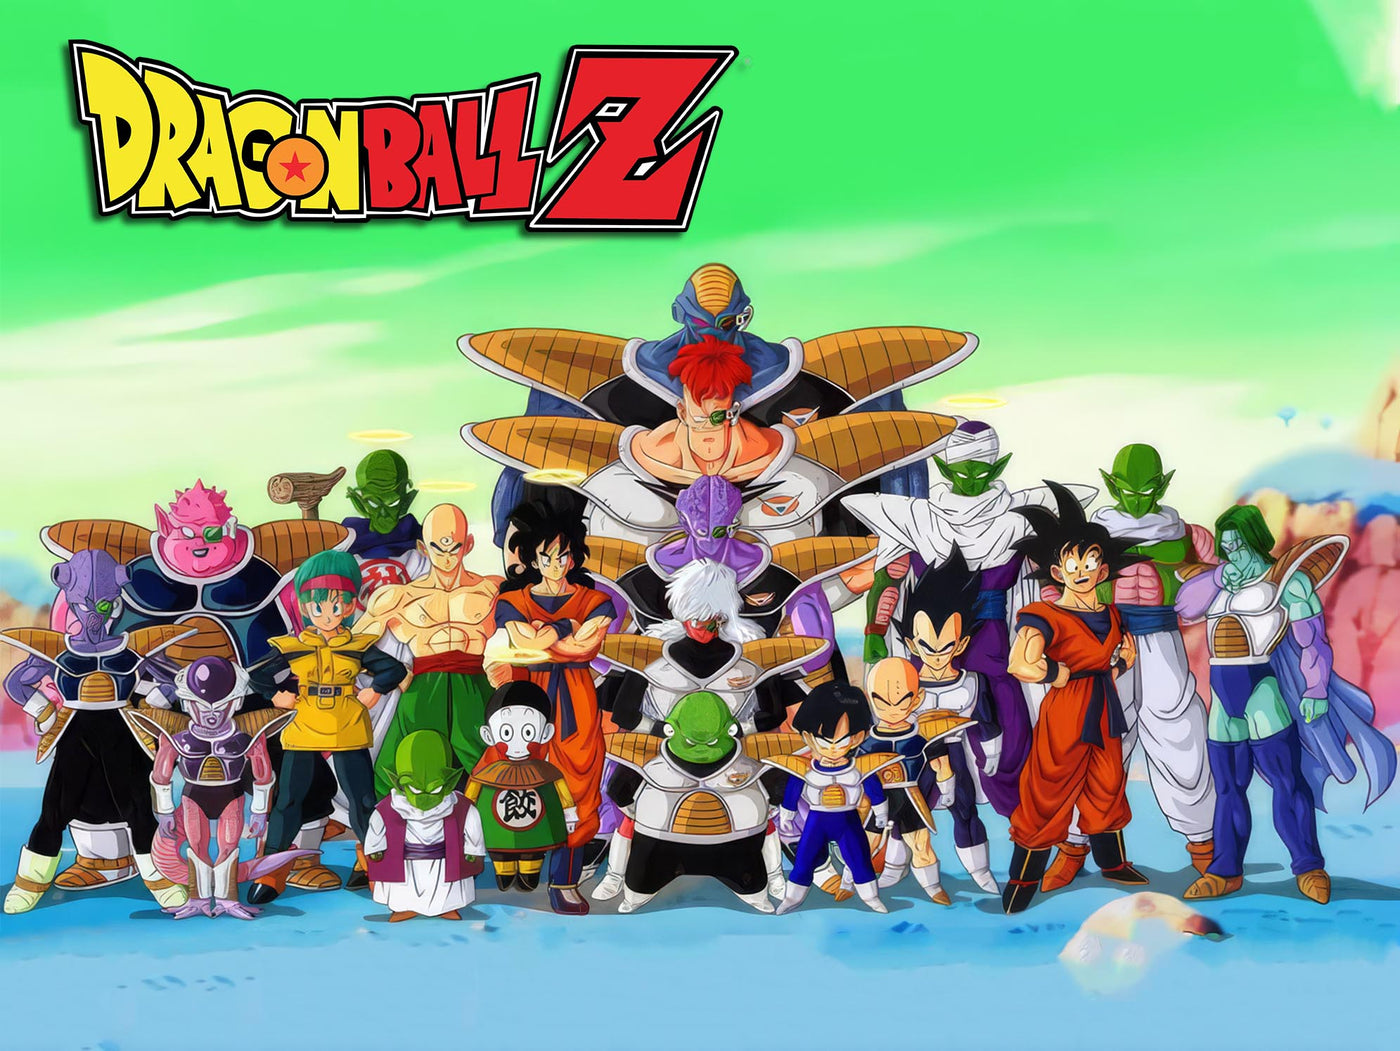 A dynamic group photograph of all the "Dragon Ball Z" characters and villains assembled on the fictional Planet Namek. The characters are positioned in various action stances, showcasing their unique costumes and powers